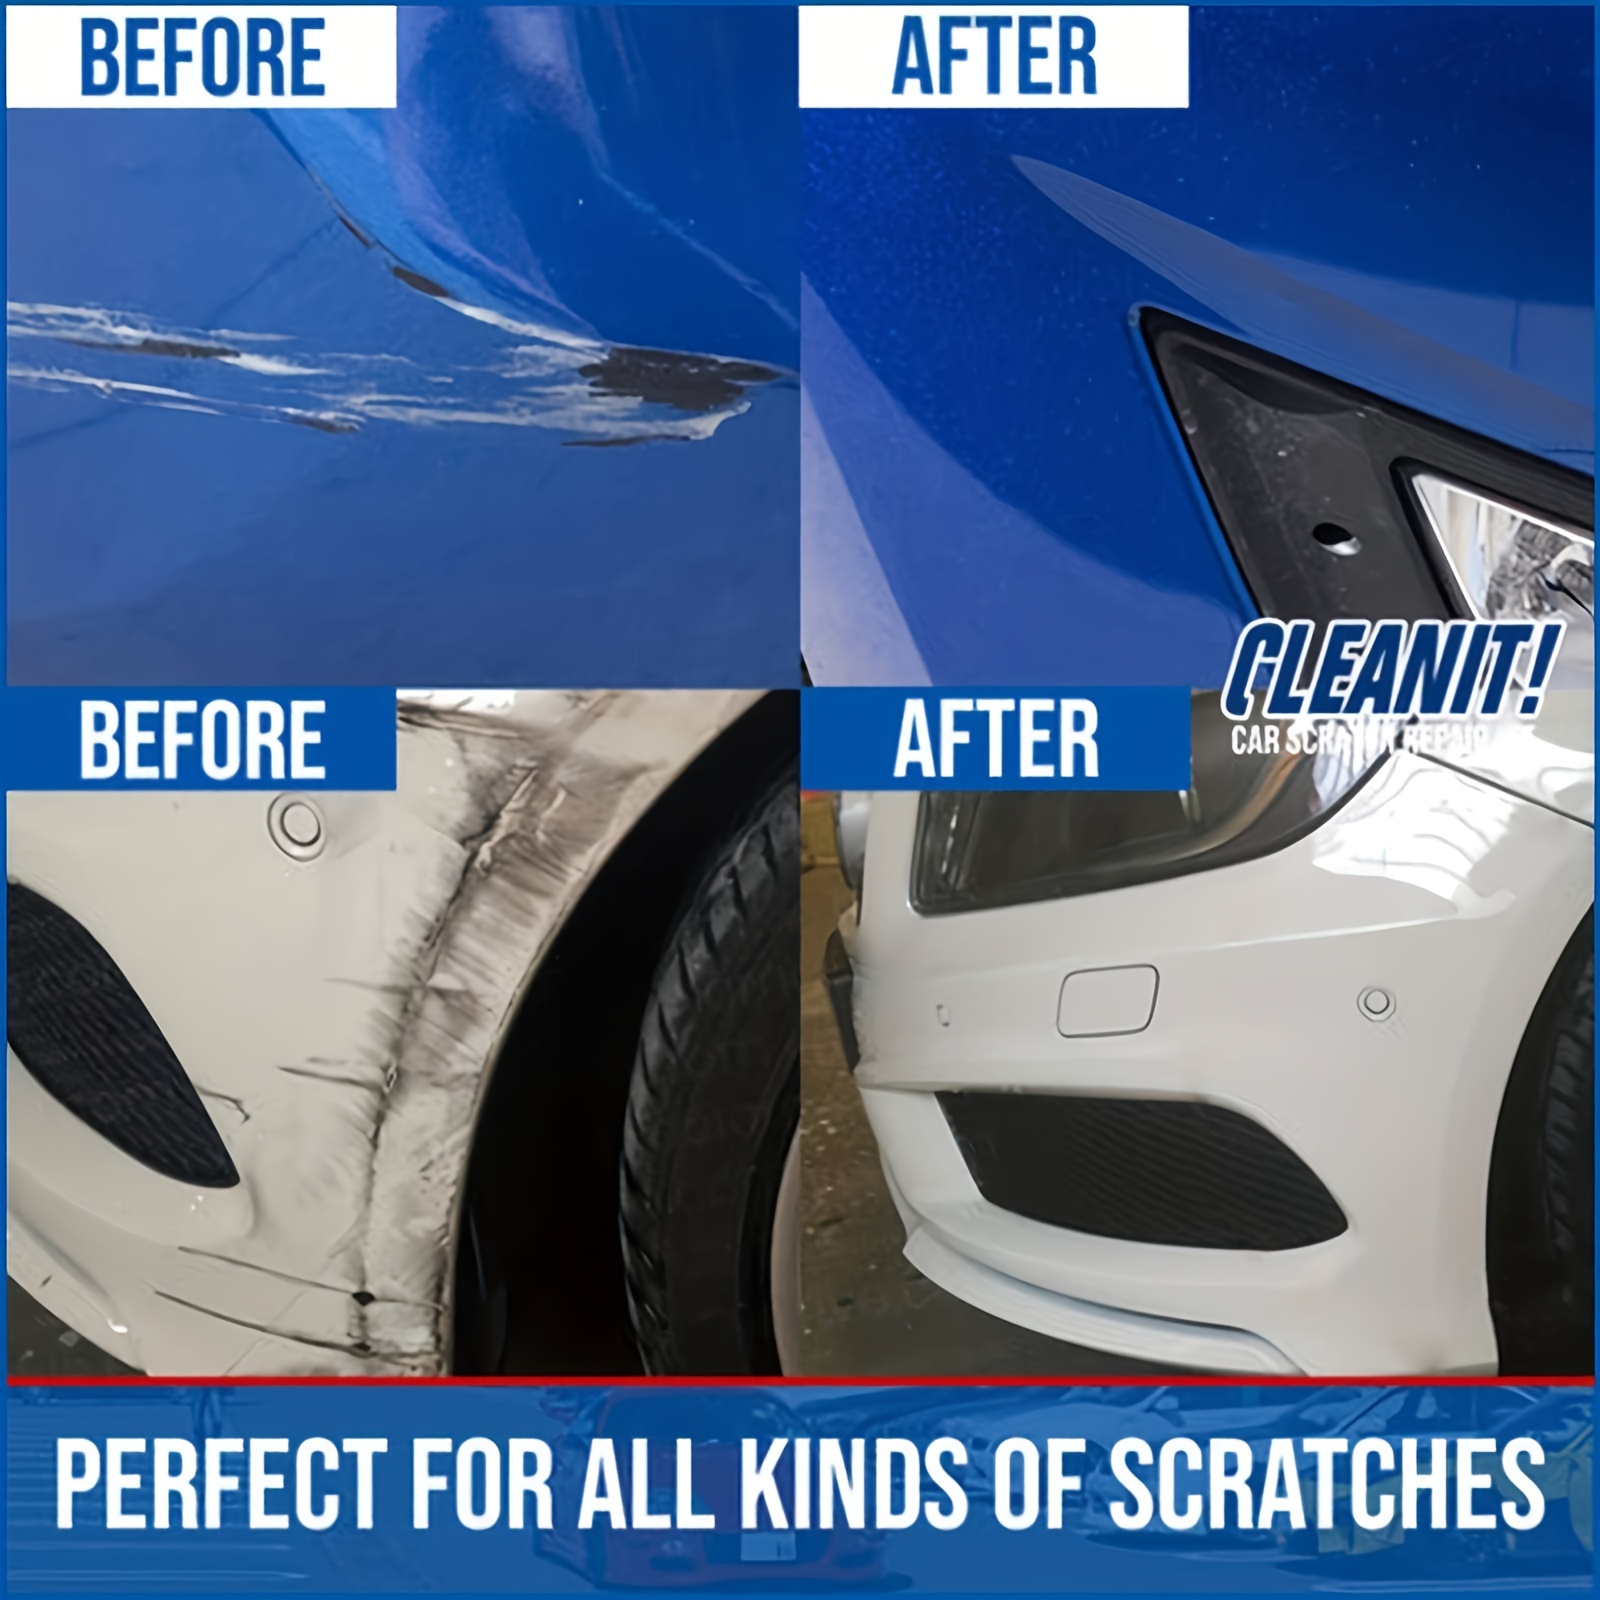 The Ultimate Car Scratch Remover Kit